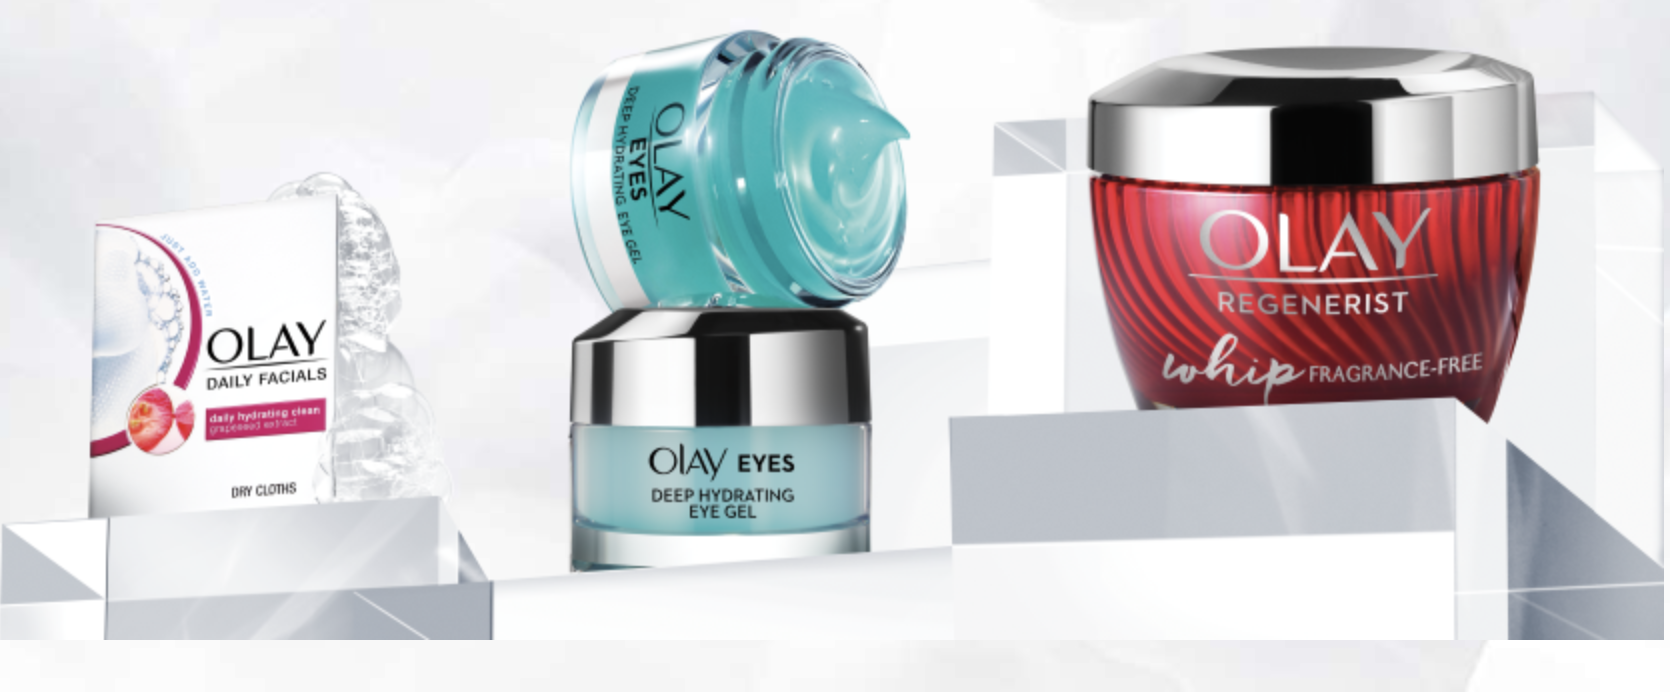 Free sample of Olay Whips